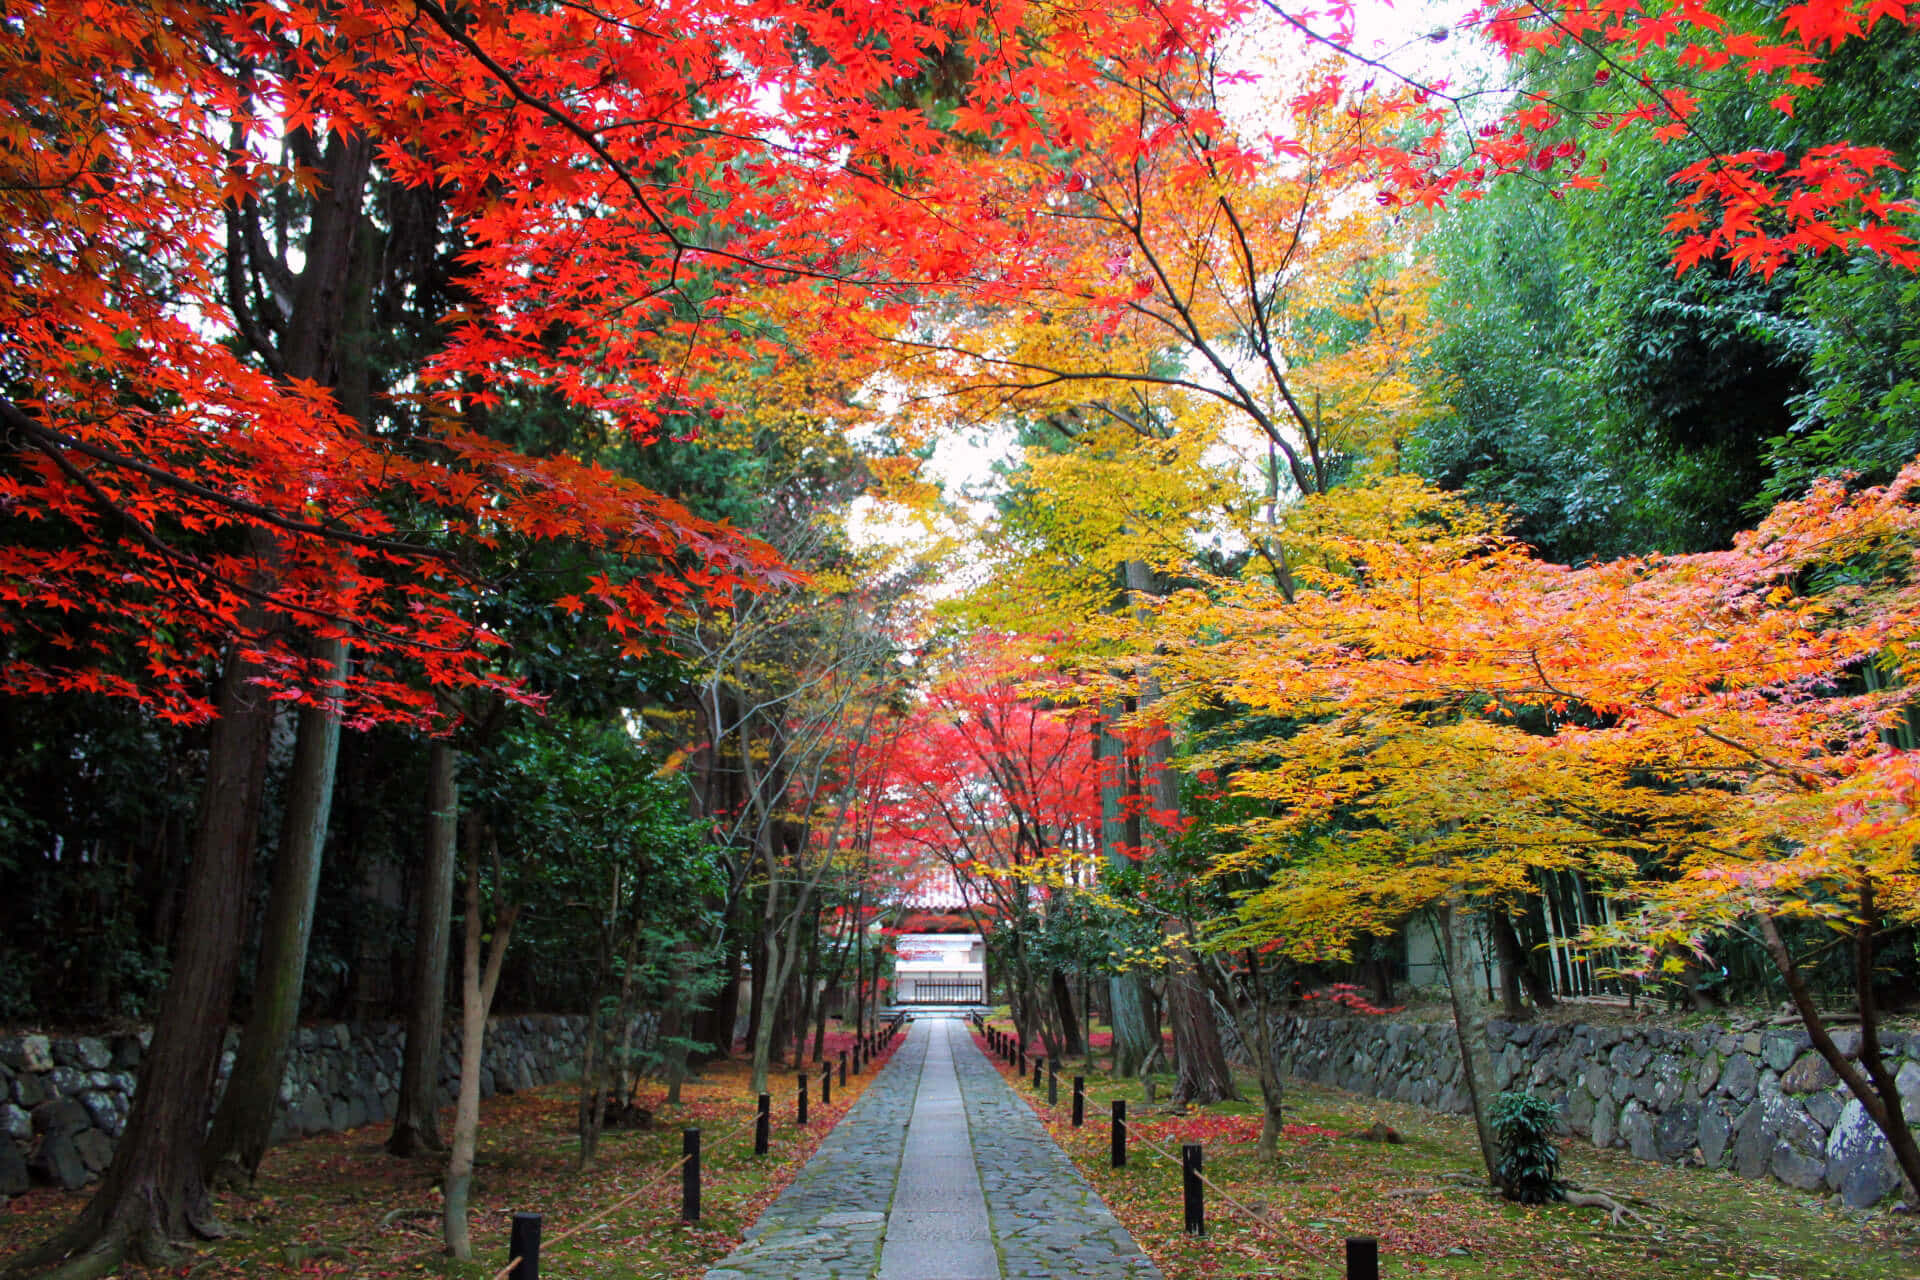 Rokuo-in Temple Beautiful Fall Pictures 1920 x 1280 Picture